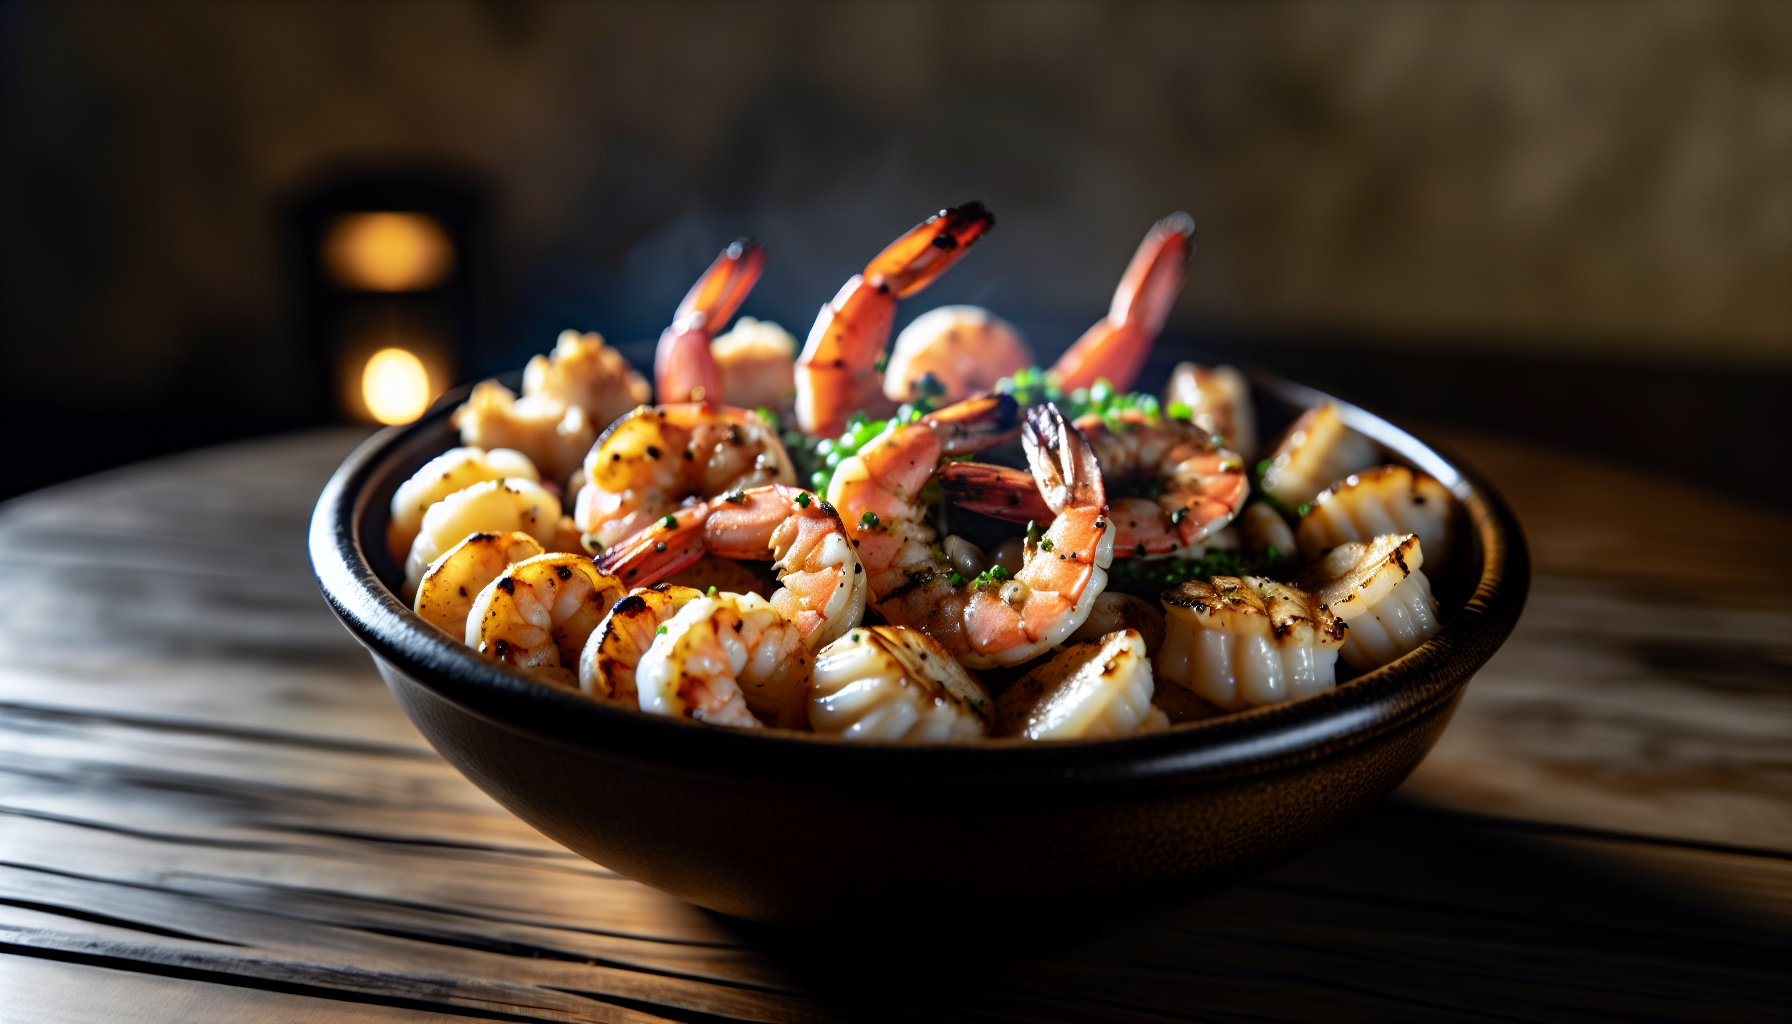 A delectable Buddy Bowl, a seafood appetizer at J.D. Hoyt's